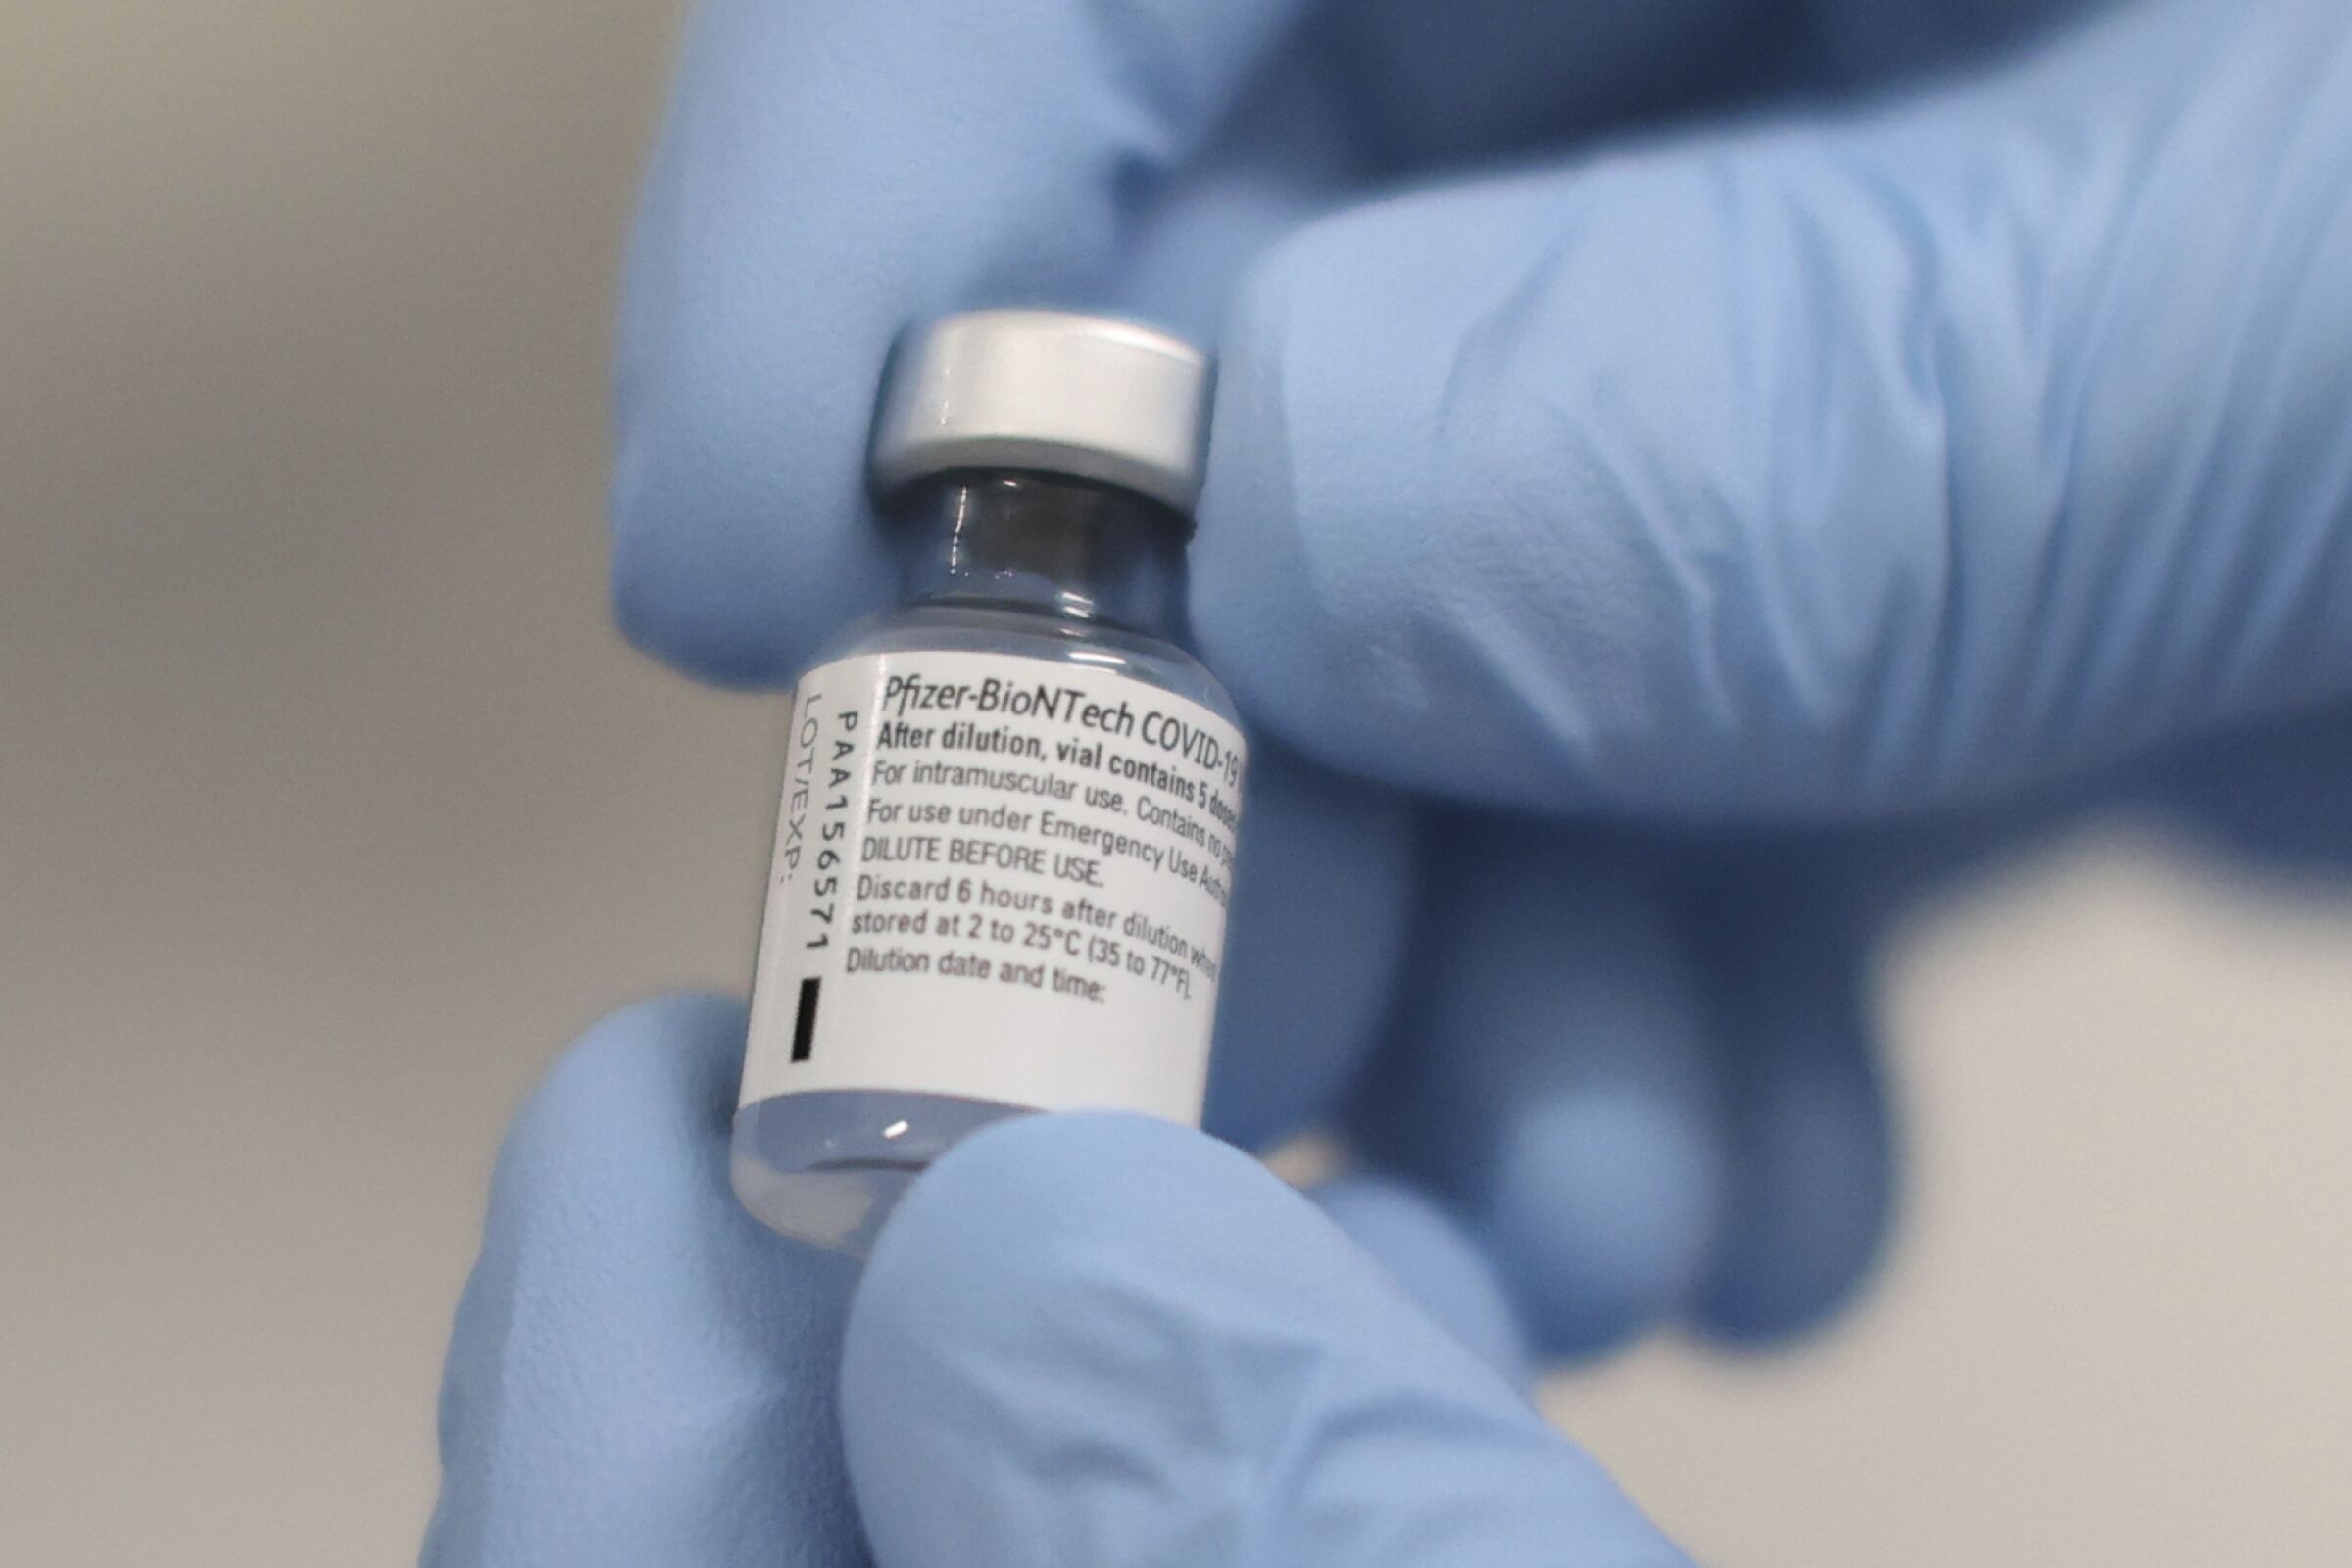 A vial of the Pfizer-BioNTech COVID-19 vaccine